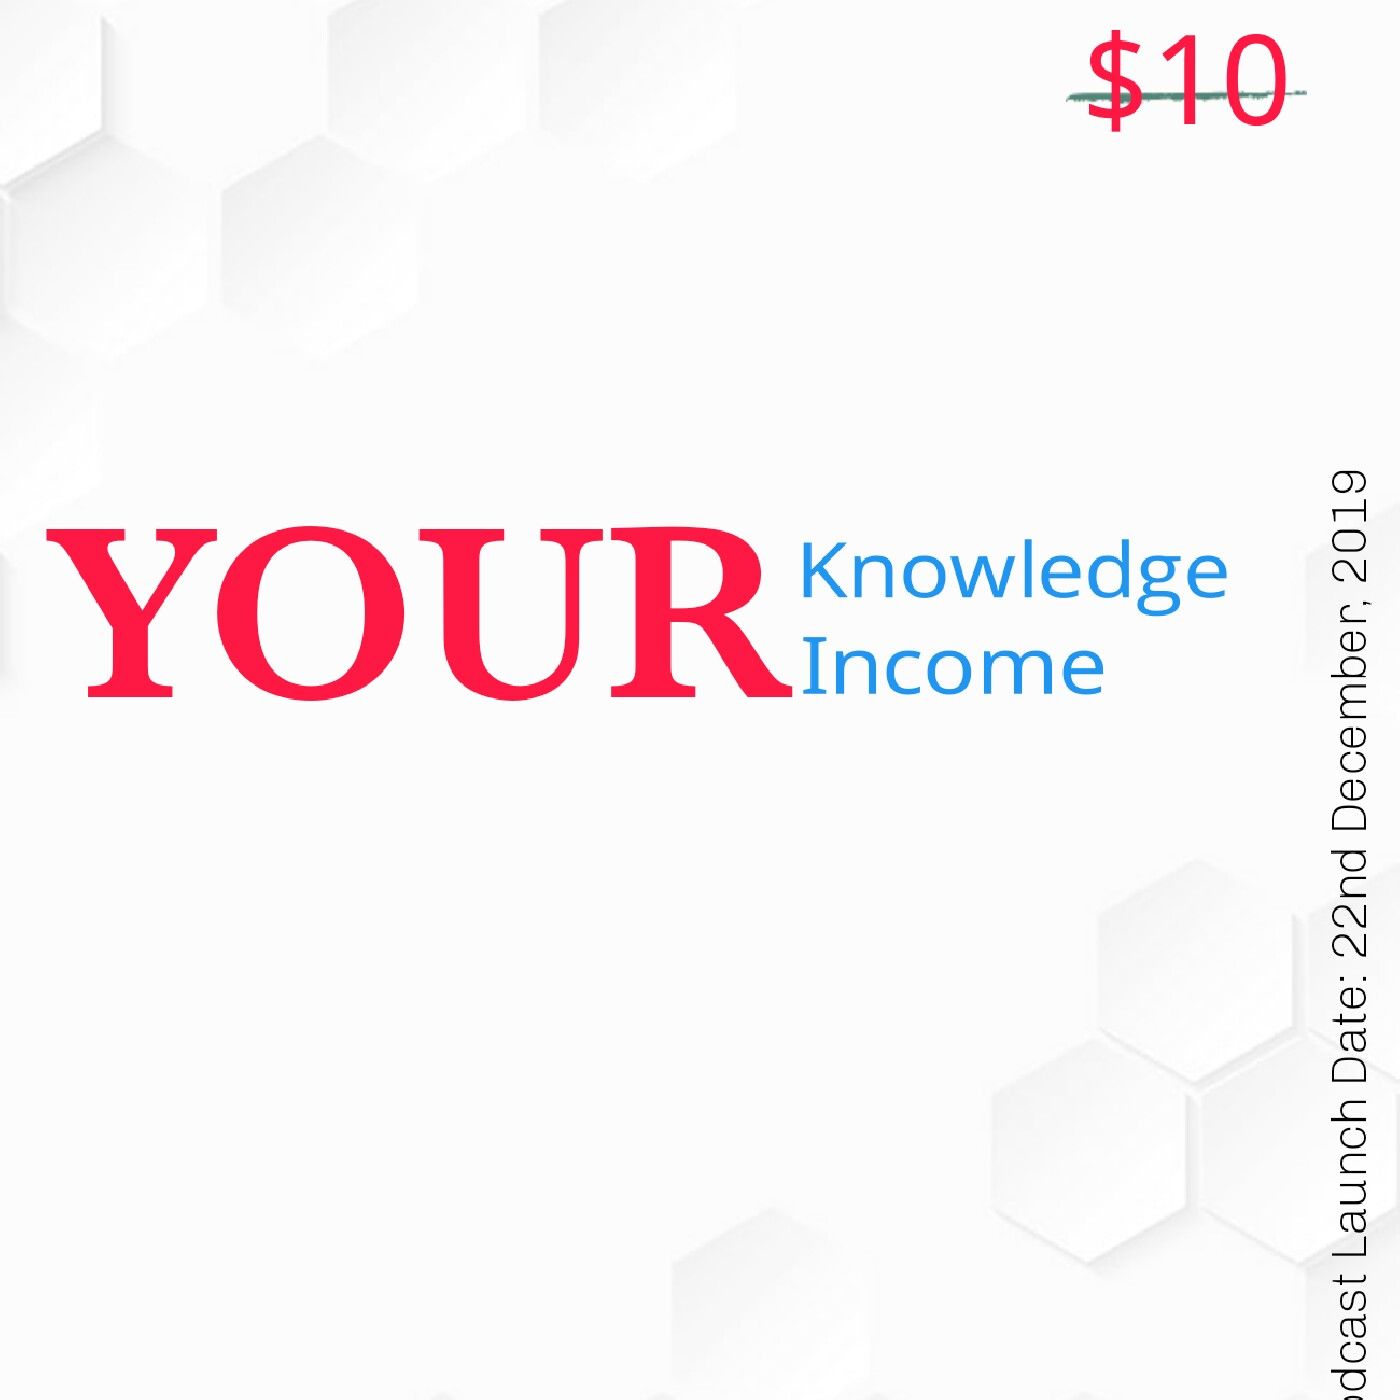 Episode 4 - Your Knowledge, Your Income